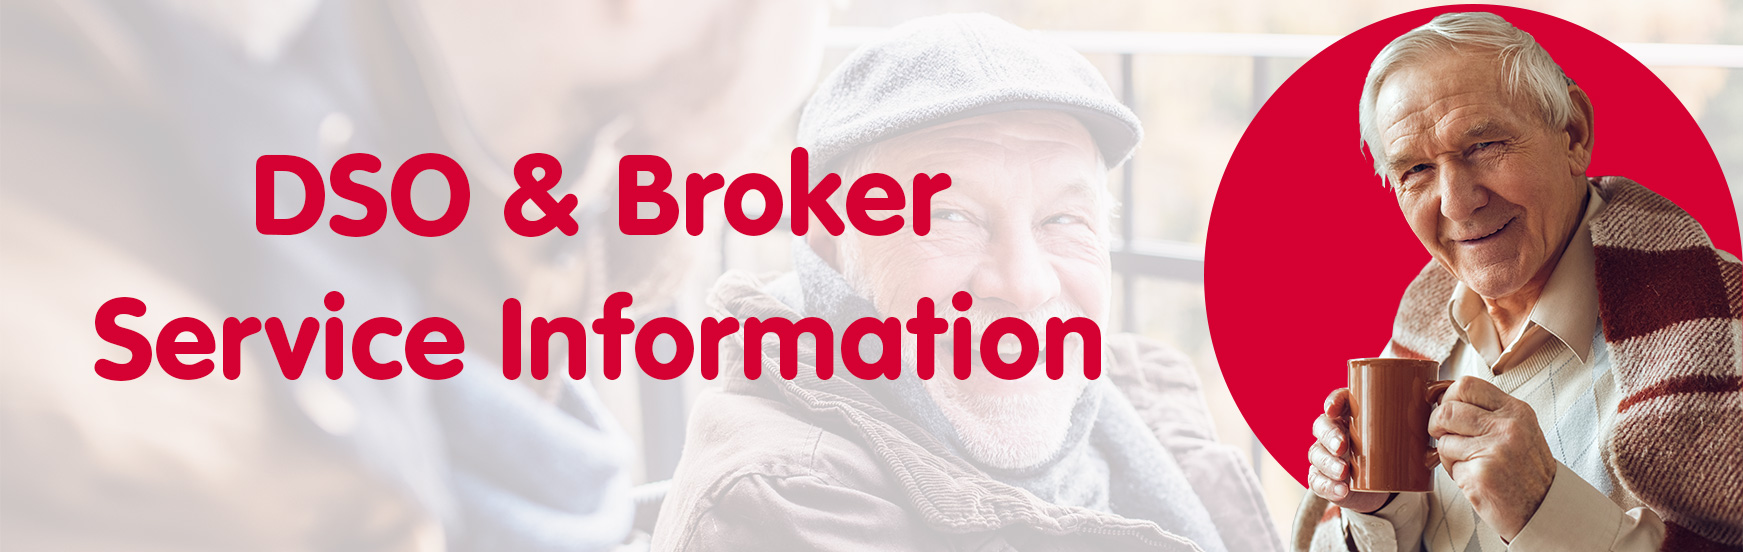 age dso broker